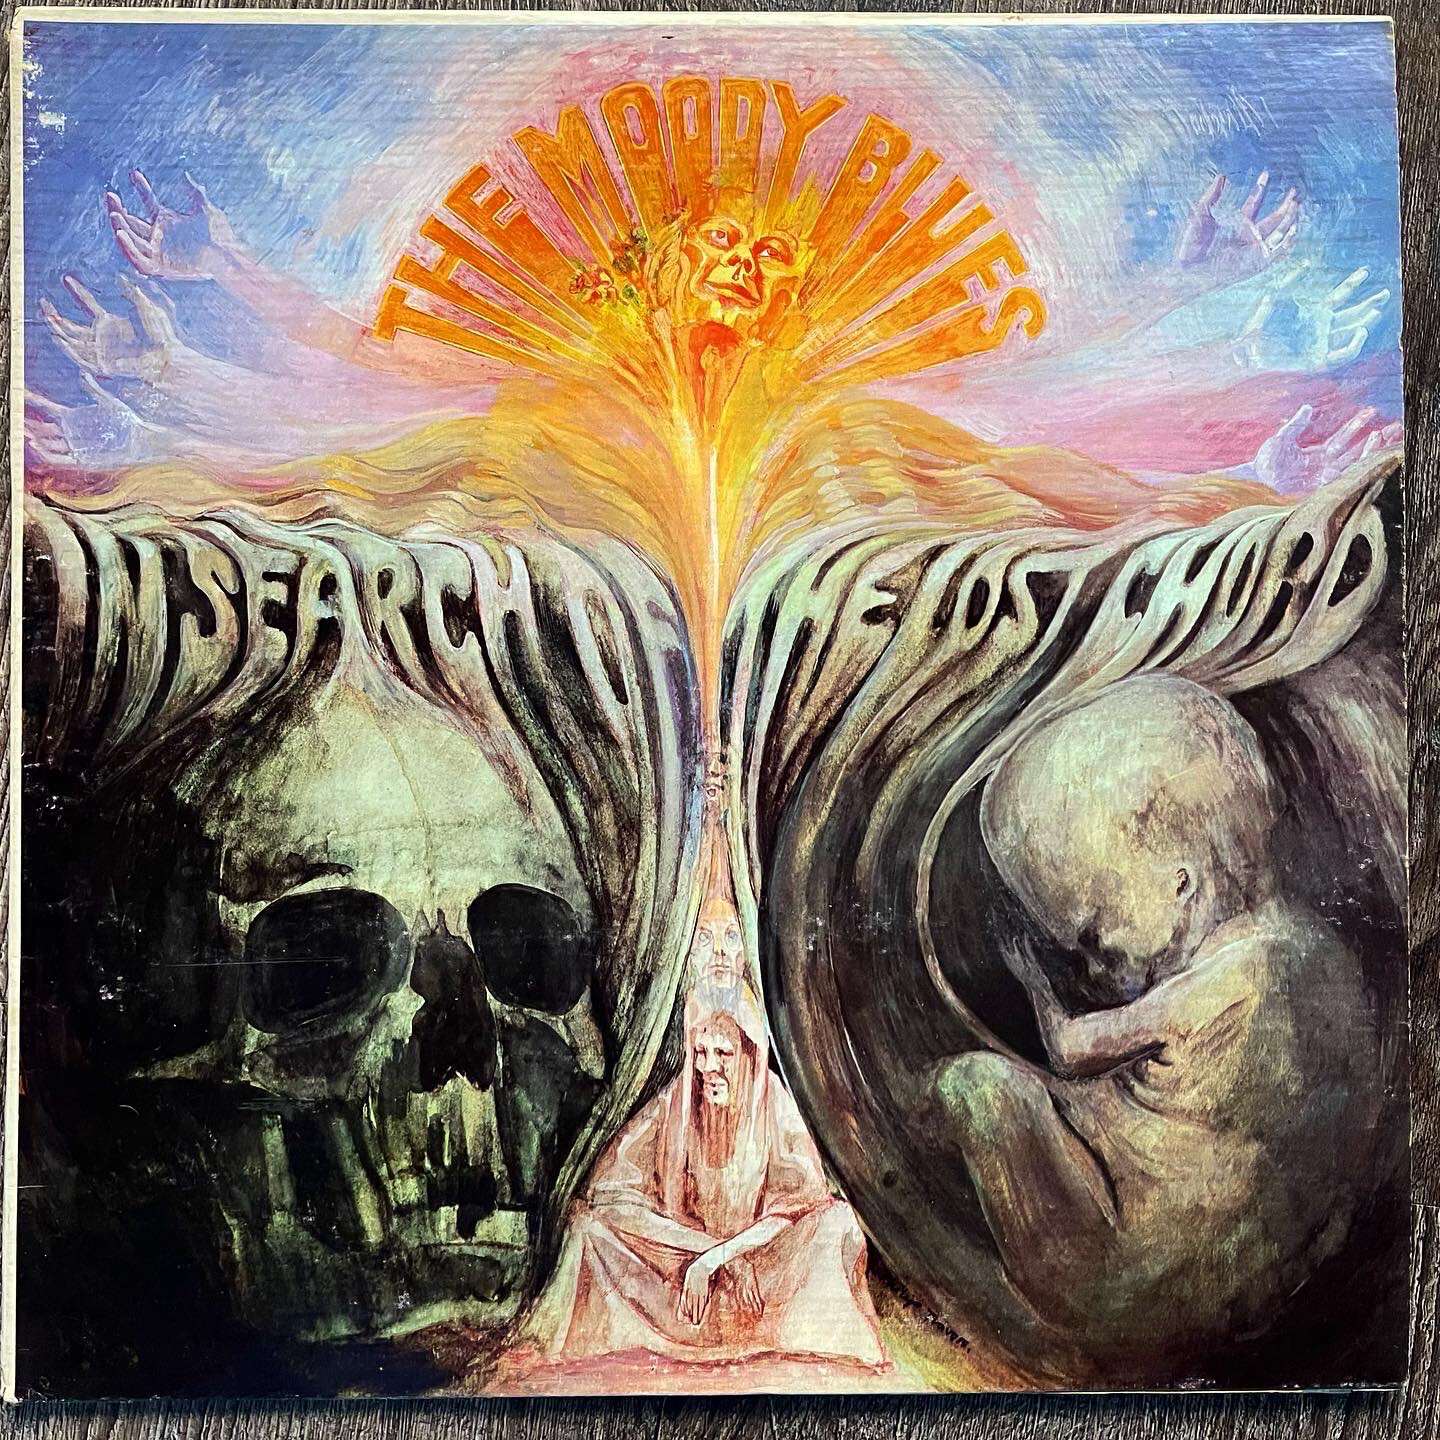 Moody Blues “In Search Of The Lost Chord” Vinyl record